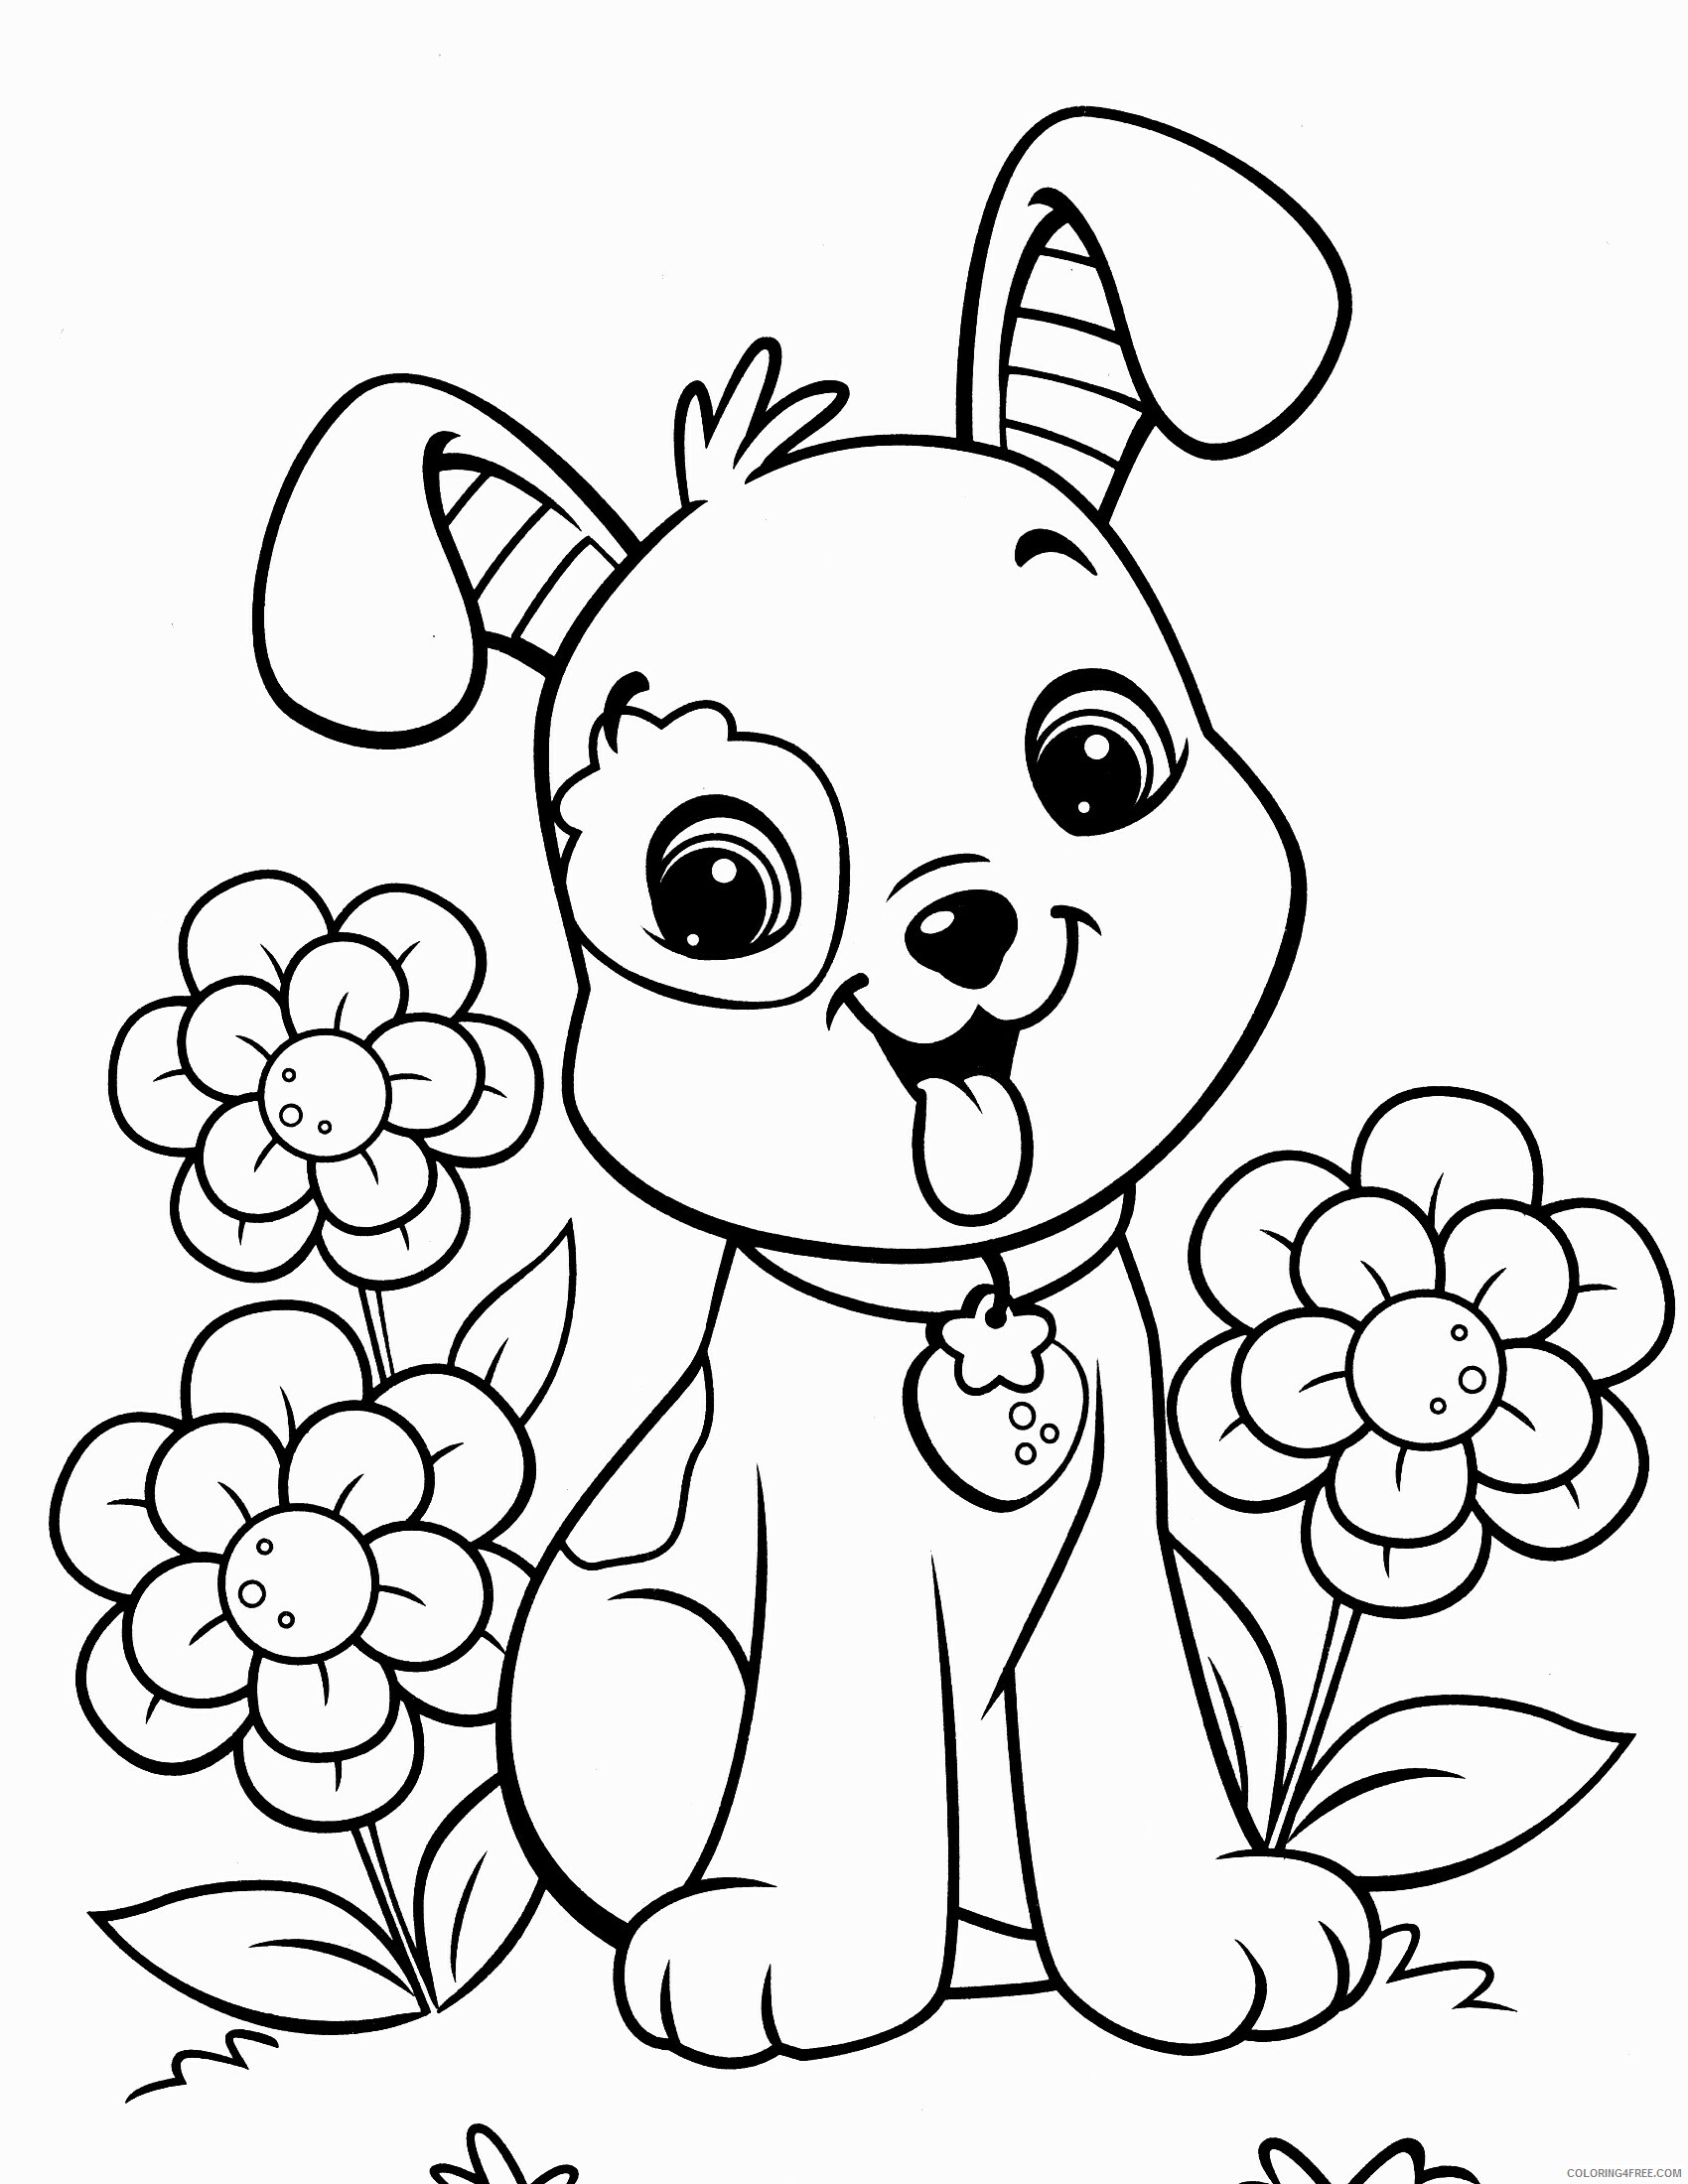 Puppy Coloring Pages Animal Printable Sheets Cute Pet Puppy 1 2021 4070 Coloring4free